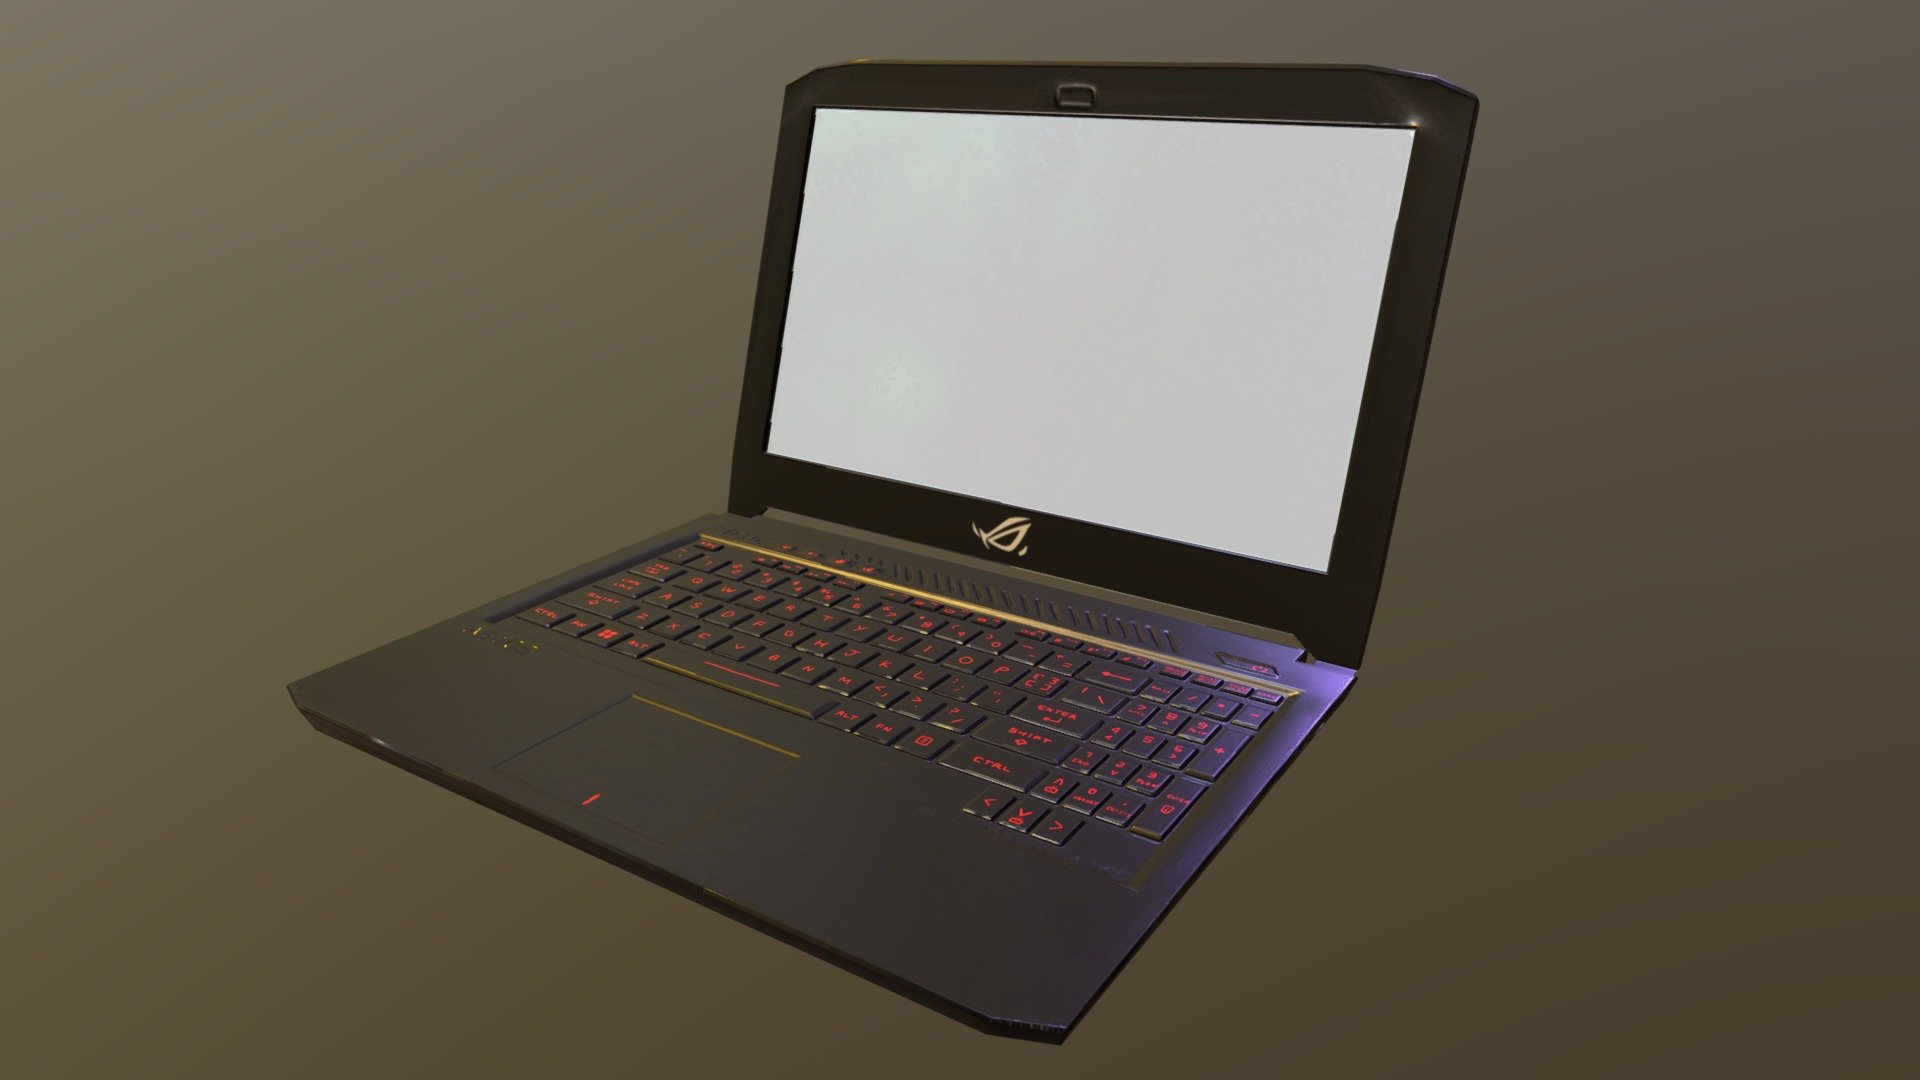 I made a simple laptop (Asus Republic of Gamers) for practice 3d model